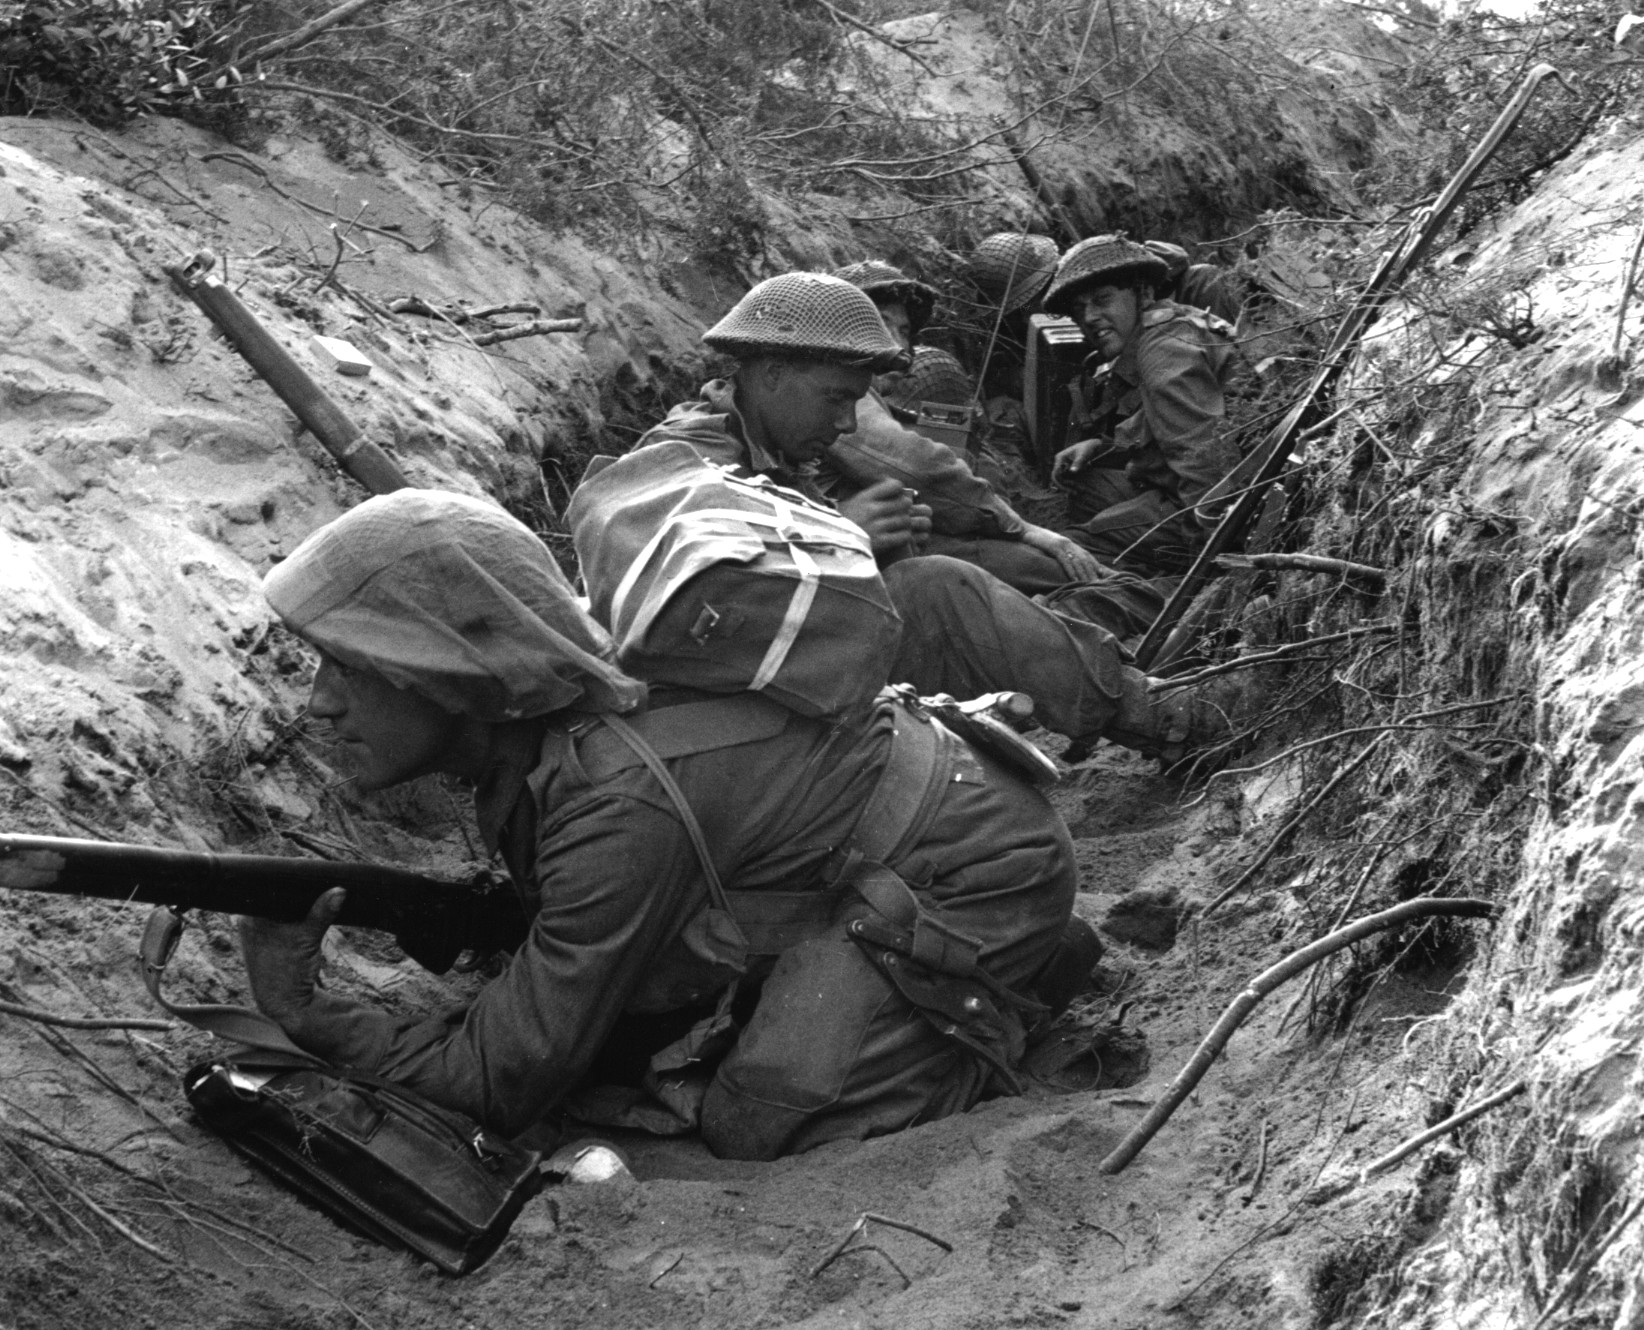 Occupying a captured German communications trench, soldiers of D Company, 1st Battalion, Green Howards prepare to move out during offensive operations at Anzio, Italy, on May 22, 1944.